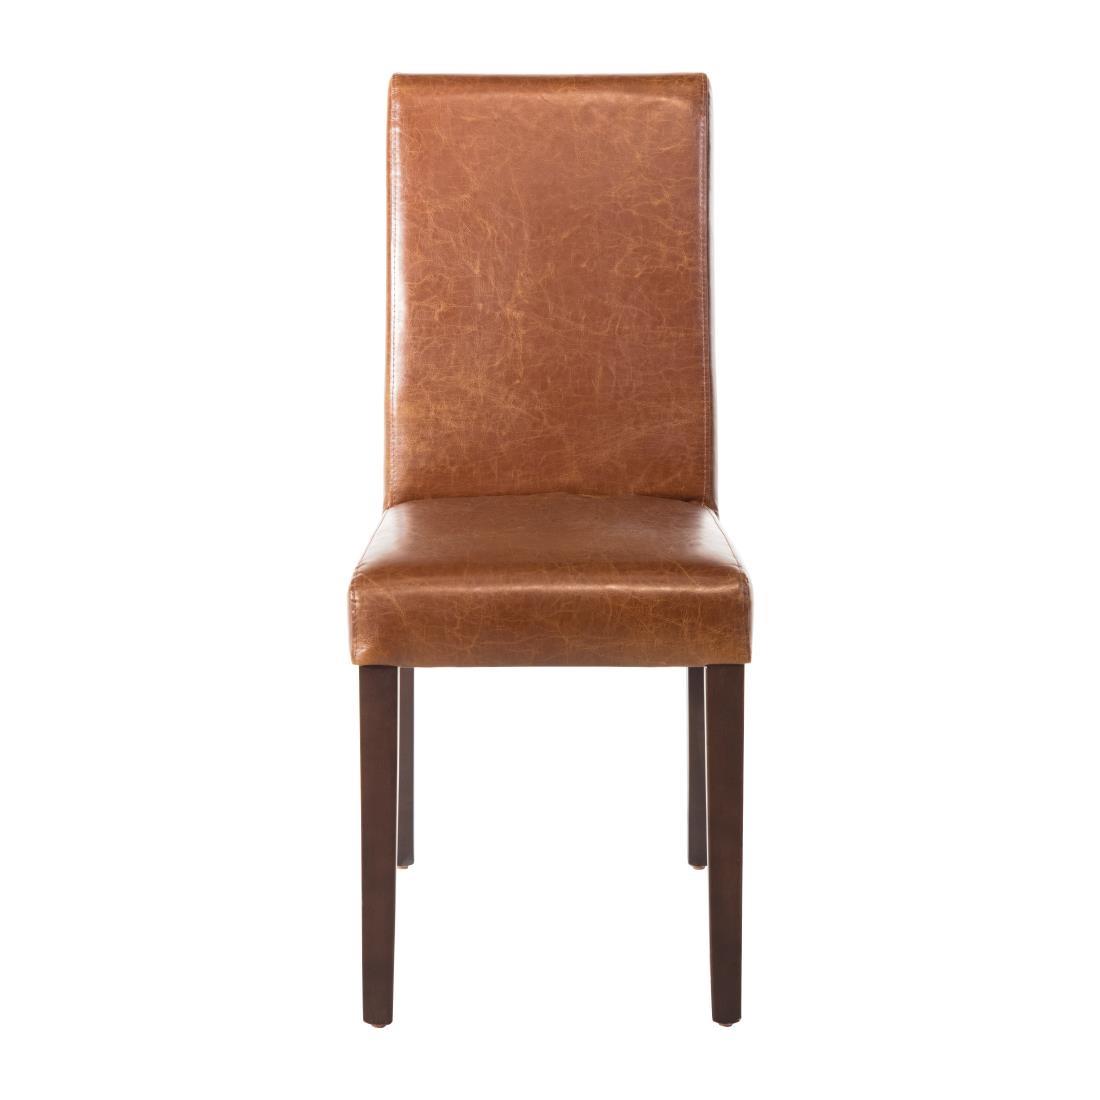 Bolero Faux Leather Dining Chair Antique Tan (Pack of 2) - GR368  - 2